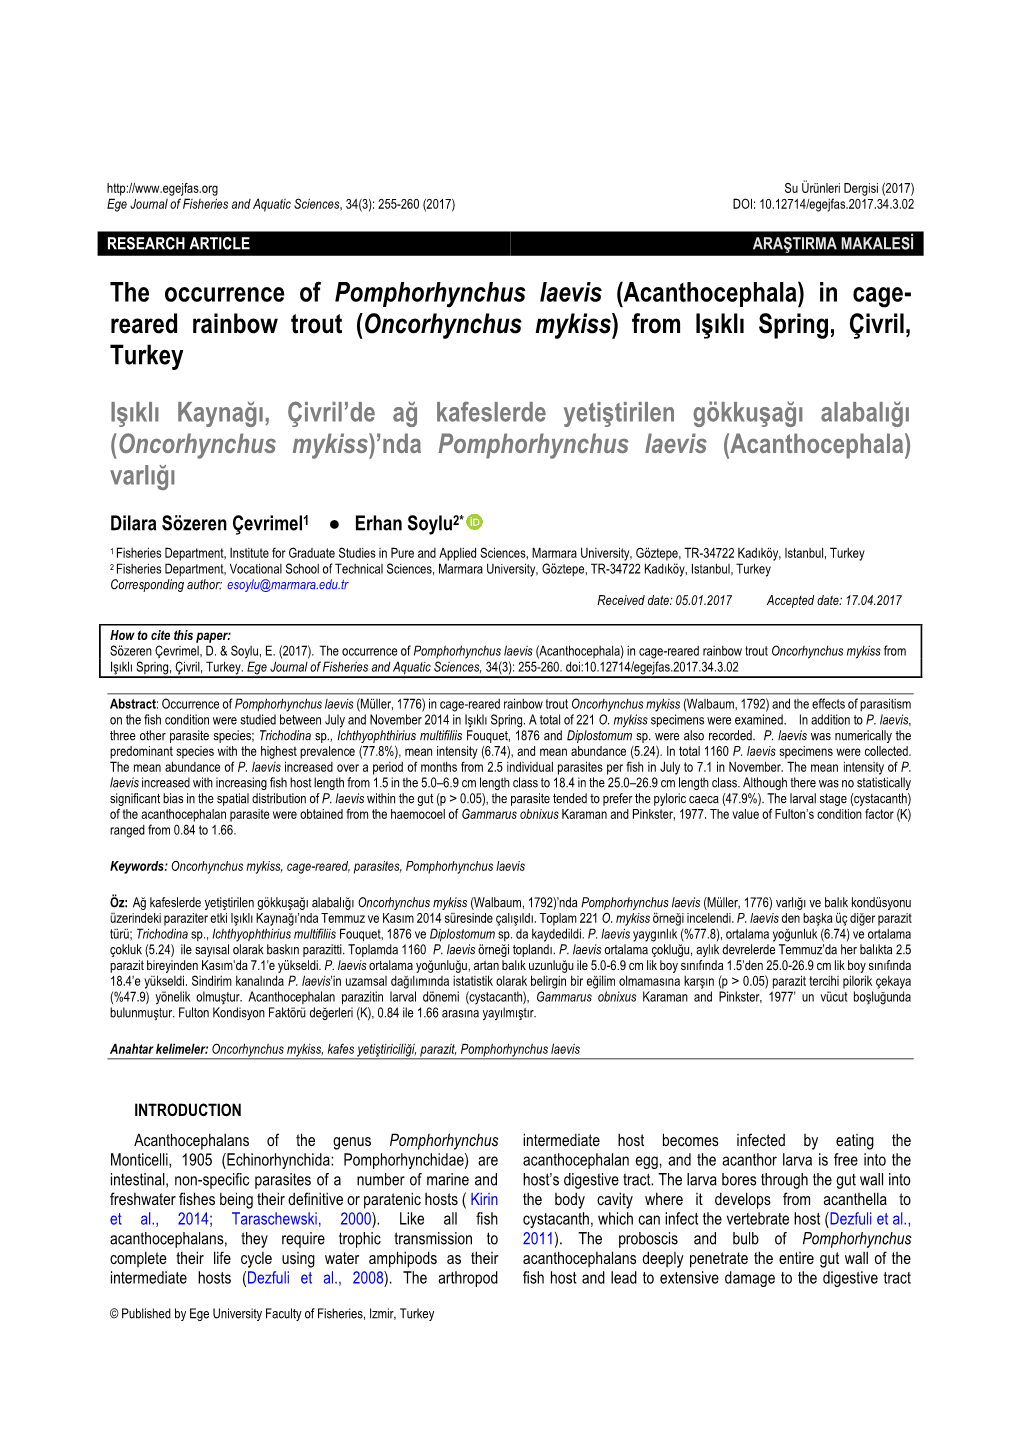 The Occurrence of Pomphorhynchus Laevis (Acanthocephala) in Cage- Reared Rainbow Trout (Oncorhynchus Mykiss) from Işıklı Spring, Çivril, Turkey